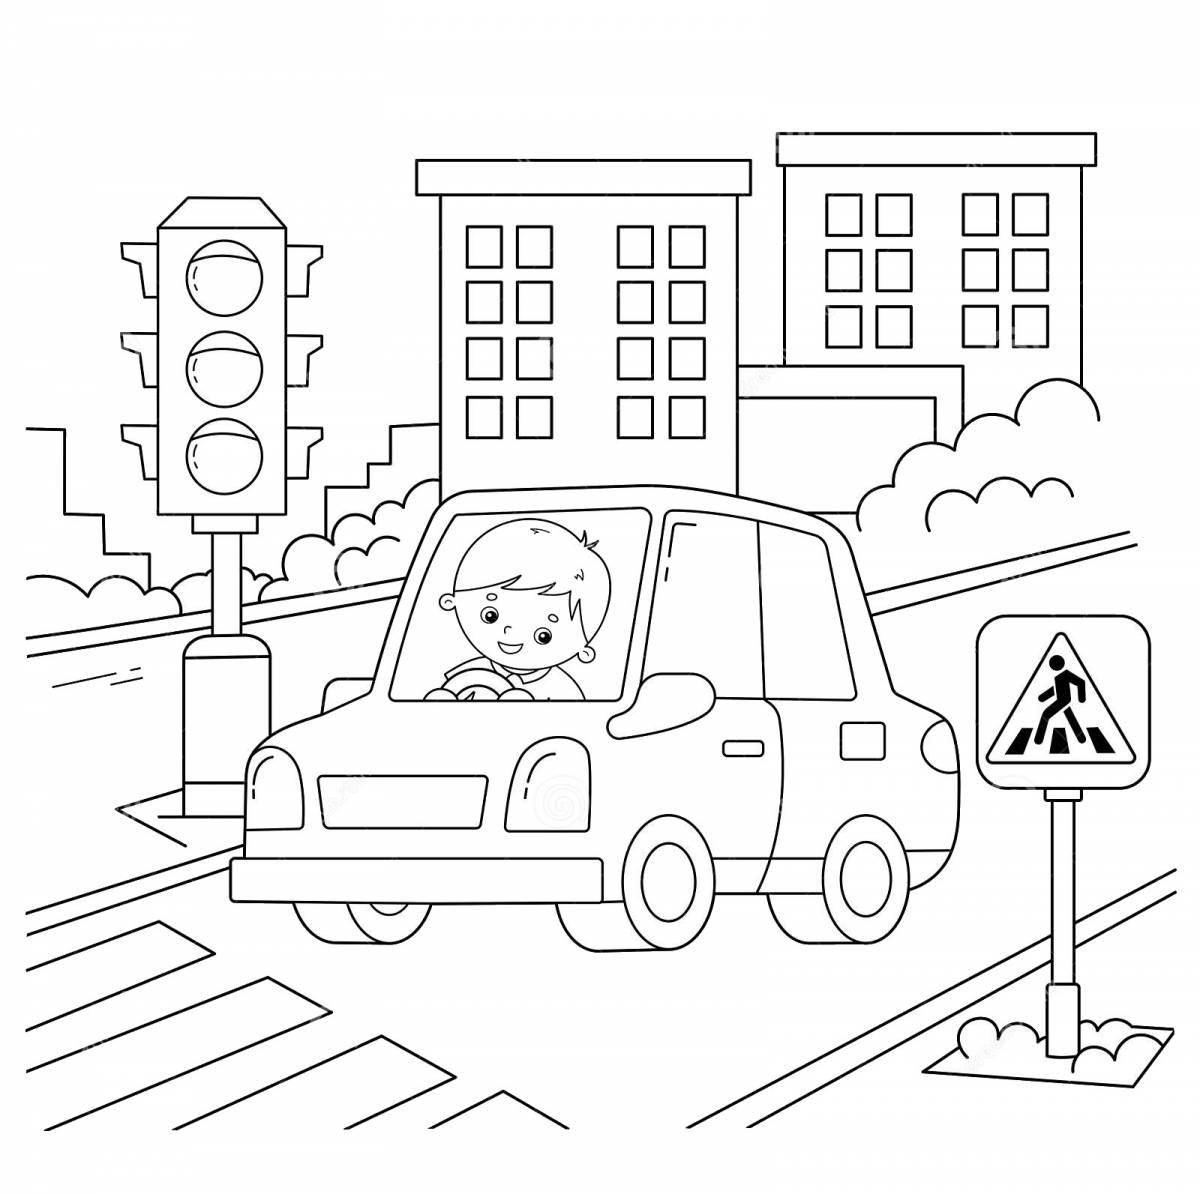 Coloring book magic rules of the road for kindergarten